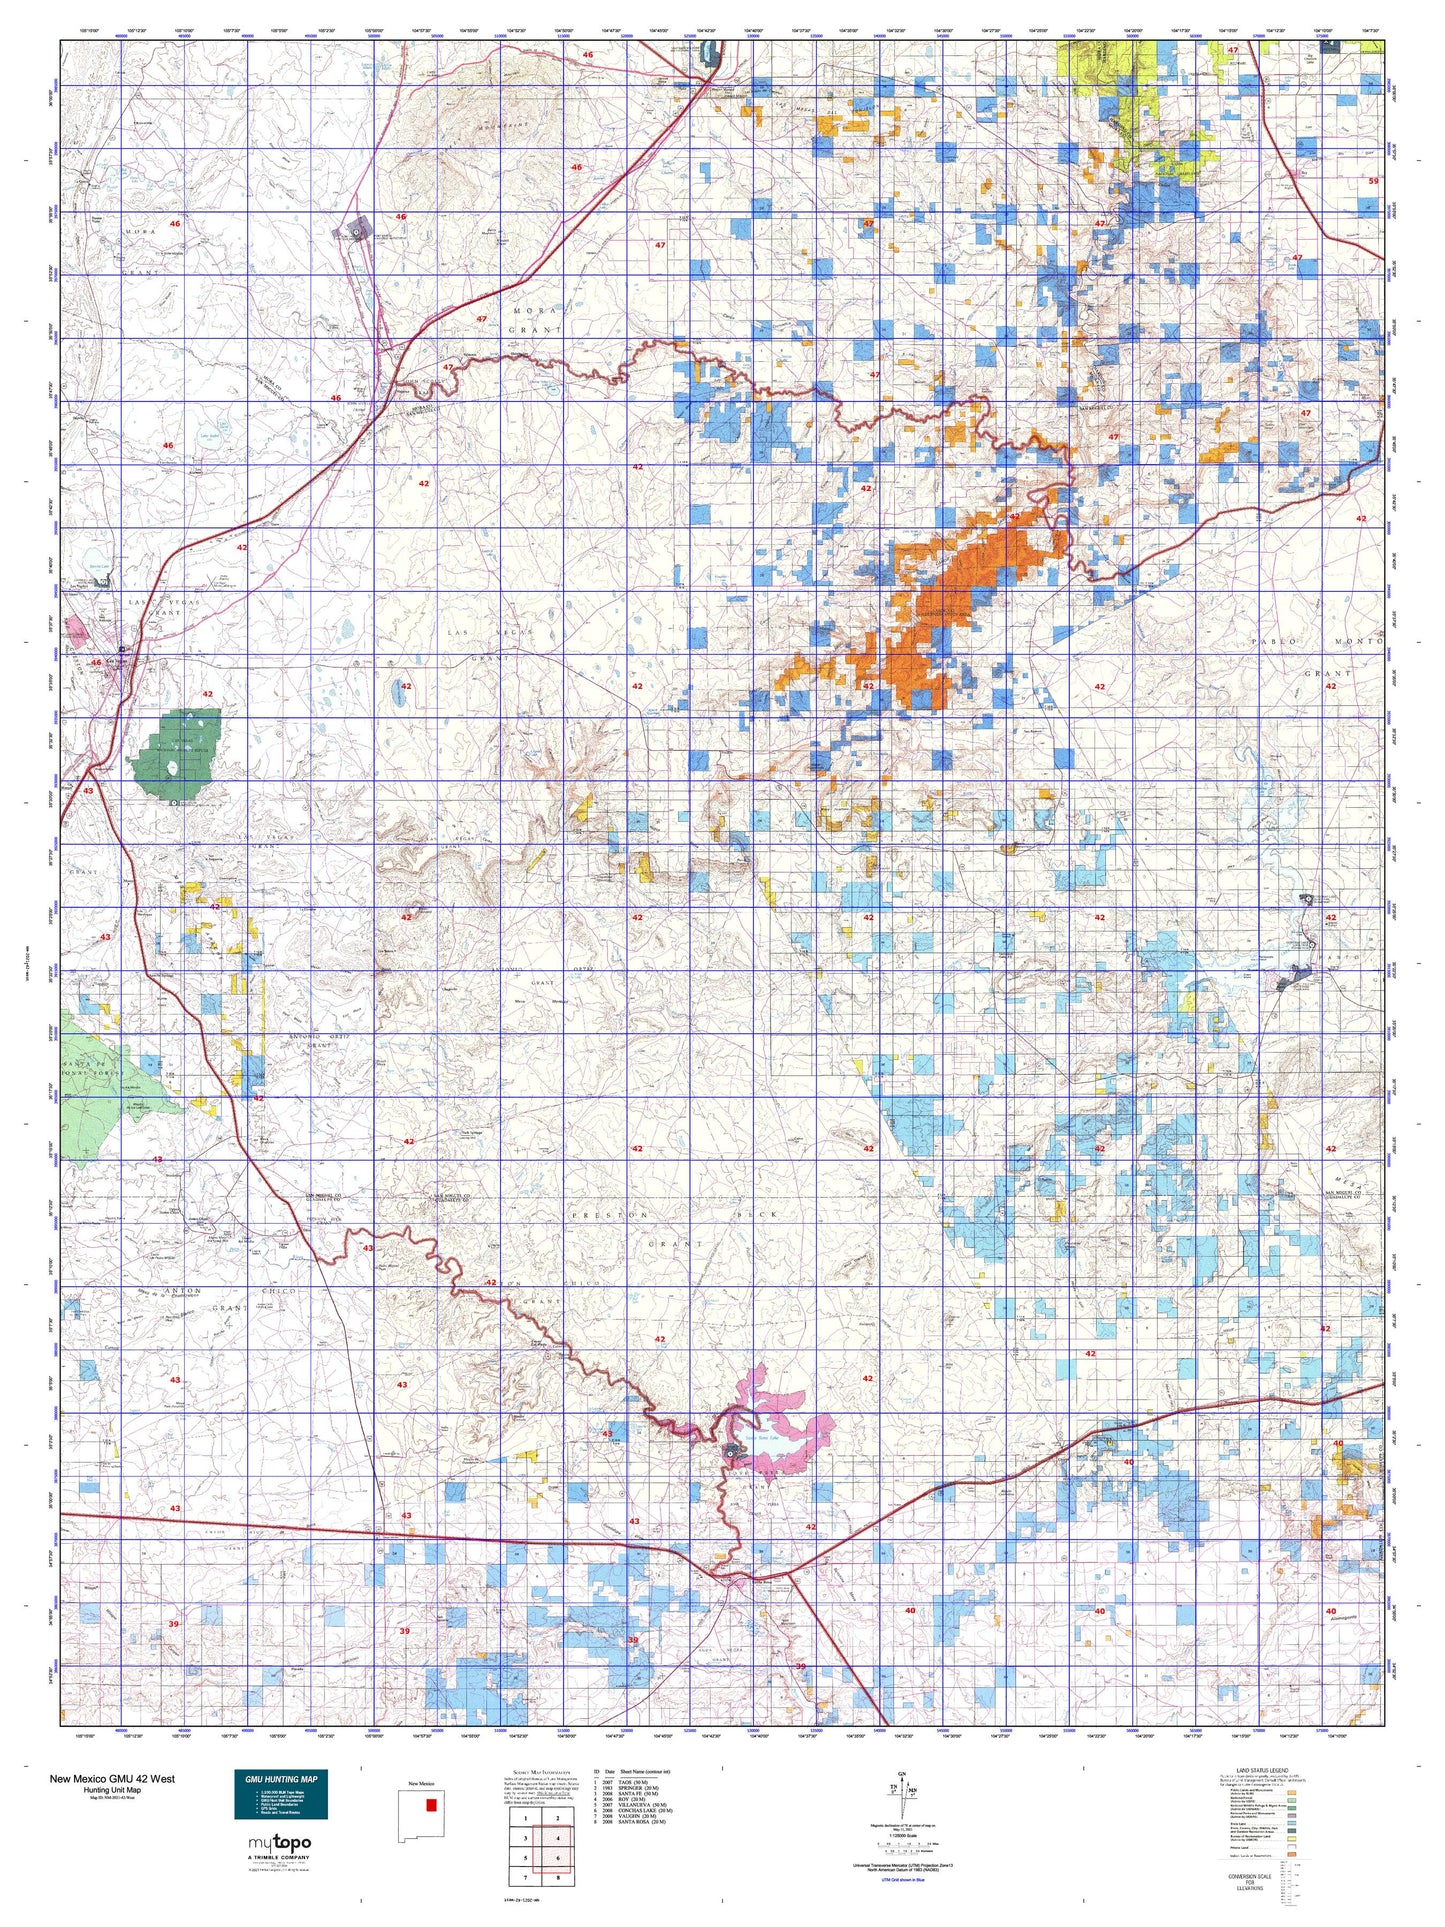 New Mexico GMU 42 West Map Image